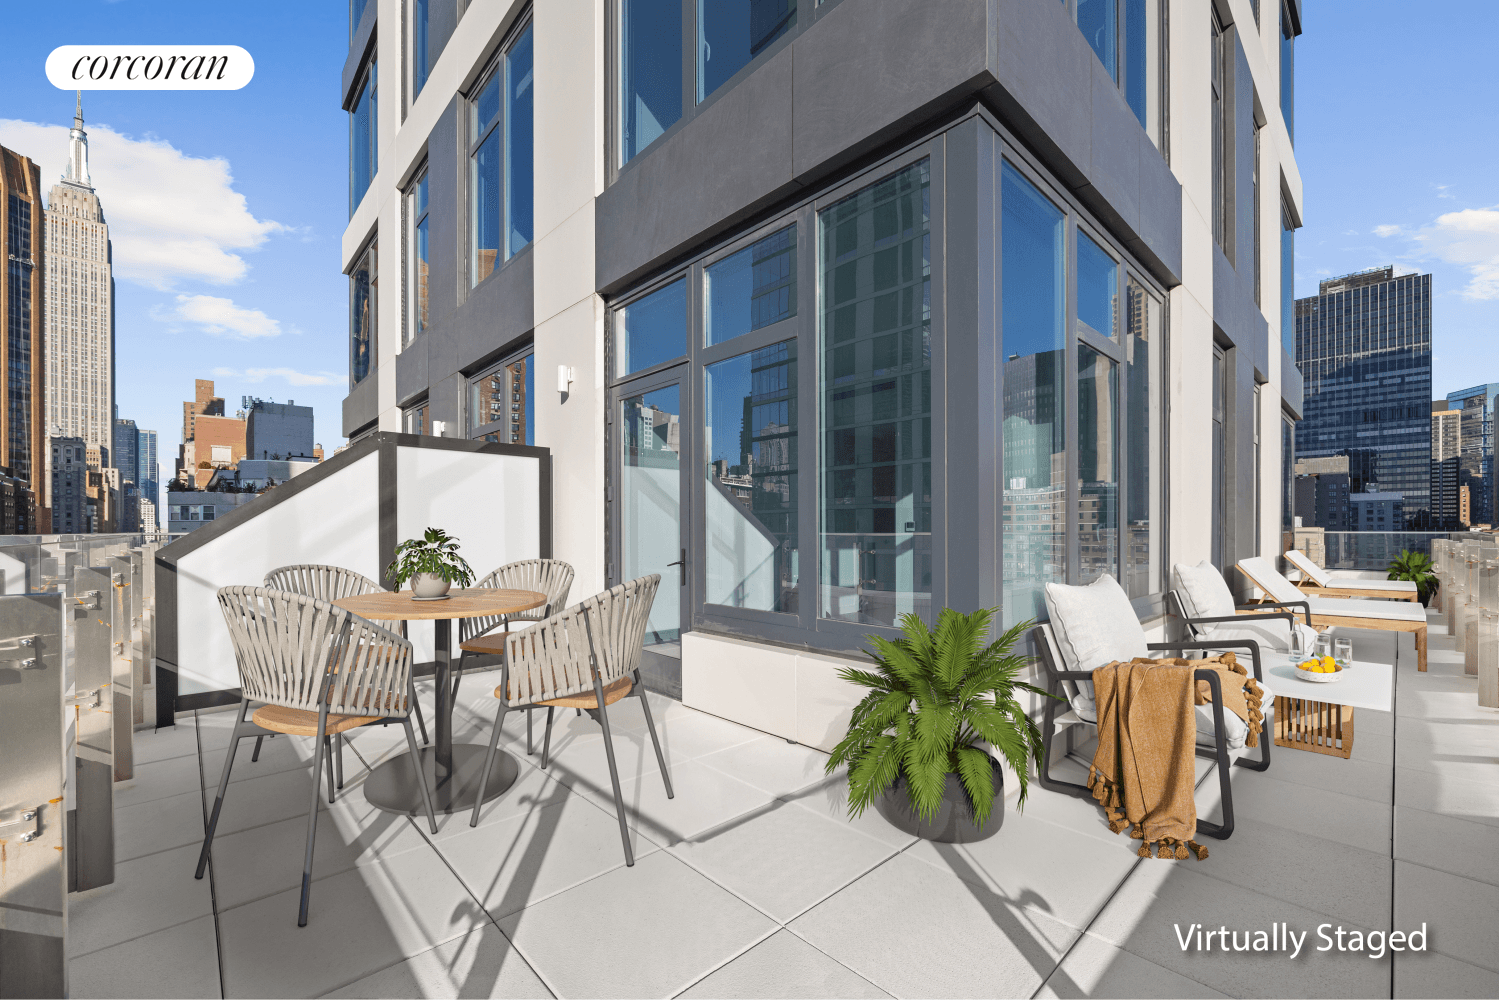 Welcome to Residence A, a corner unit one bedroom with a private wrap terrace facing north, south, and west featuring remarkable unobstructed city and Empire State views.